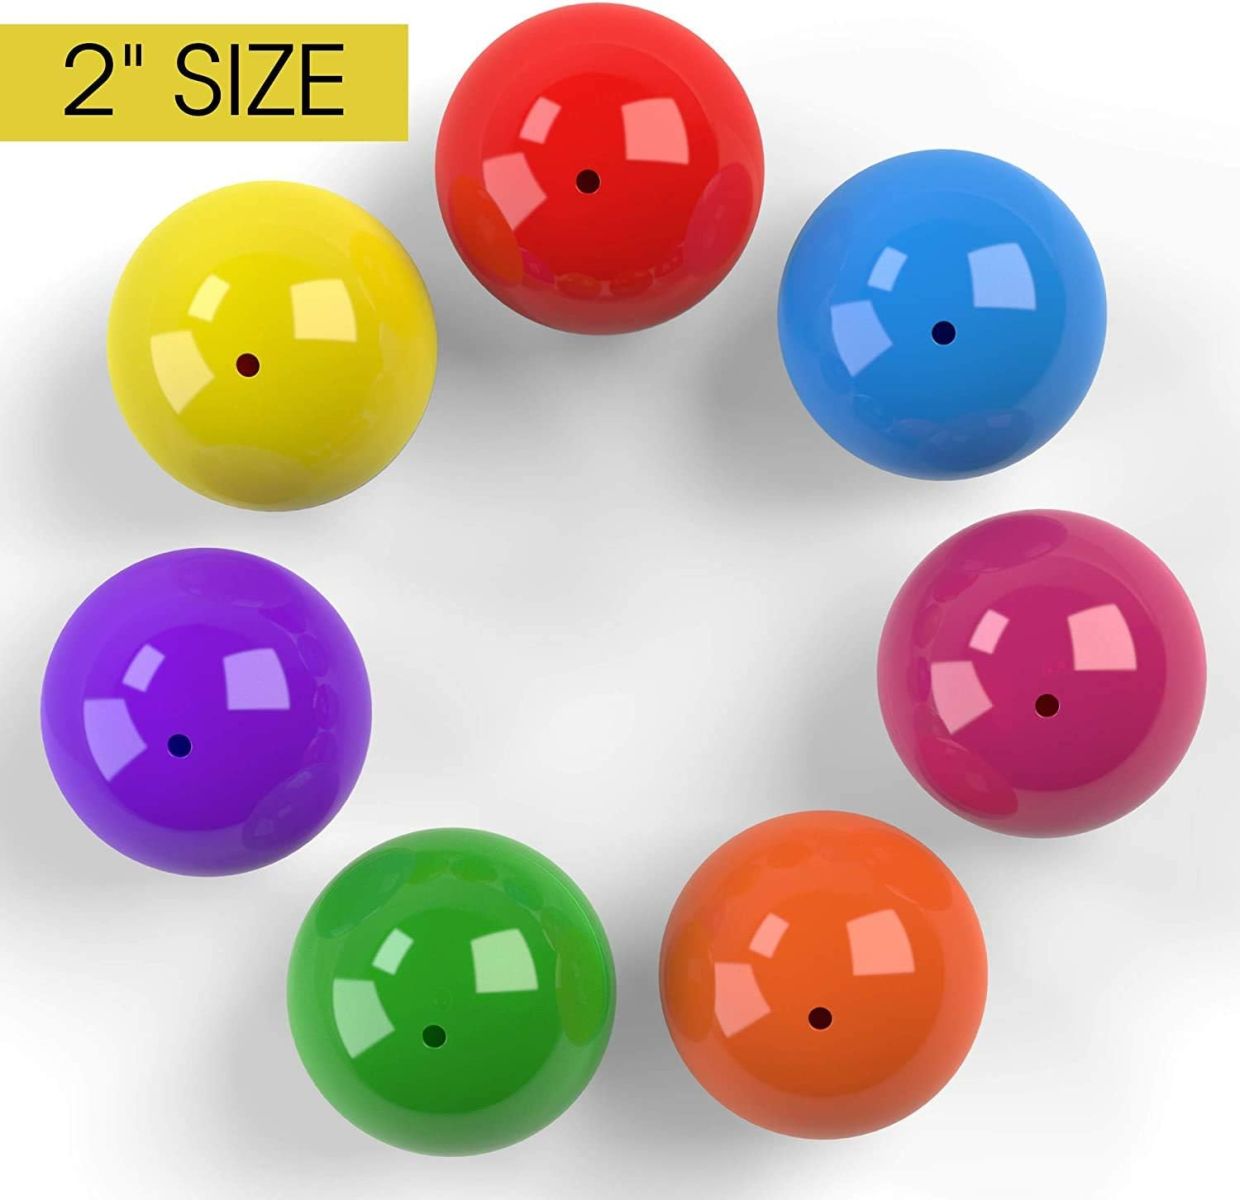 Empty Colored Round Capsules 2 inch 50 pcs Bulk 7 Colors Capsule for Gumball Machines Plastic Containers 50 mm